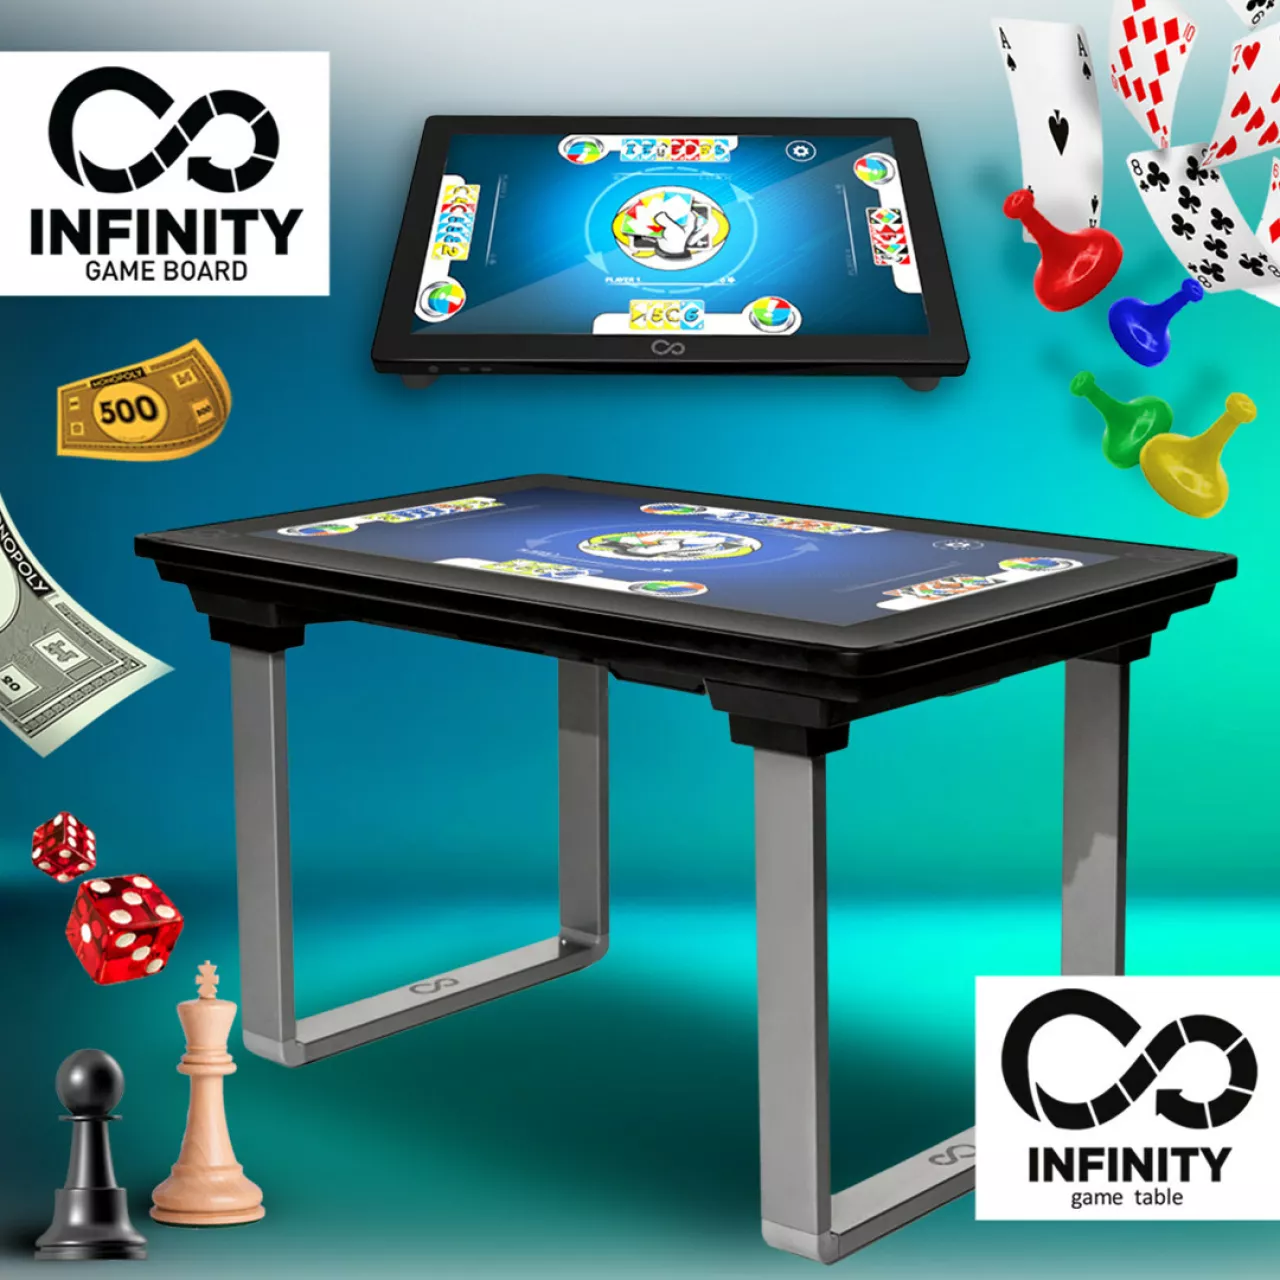 ARCADE1UP LEVELS UP GAME NIGHT WITH RELEASE OF INFINITY GAME BOARD